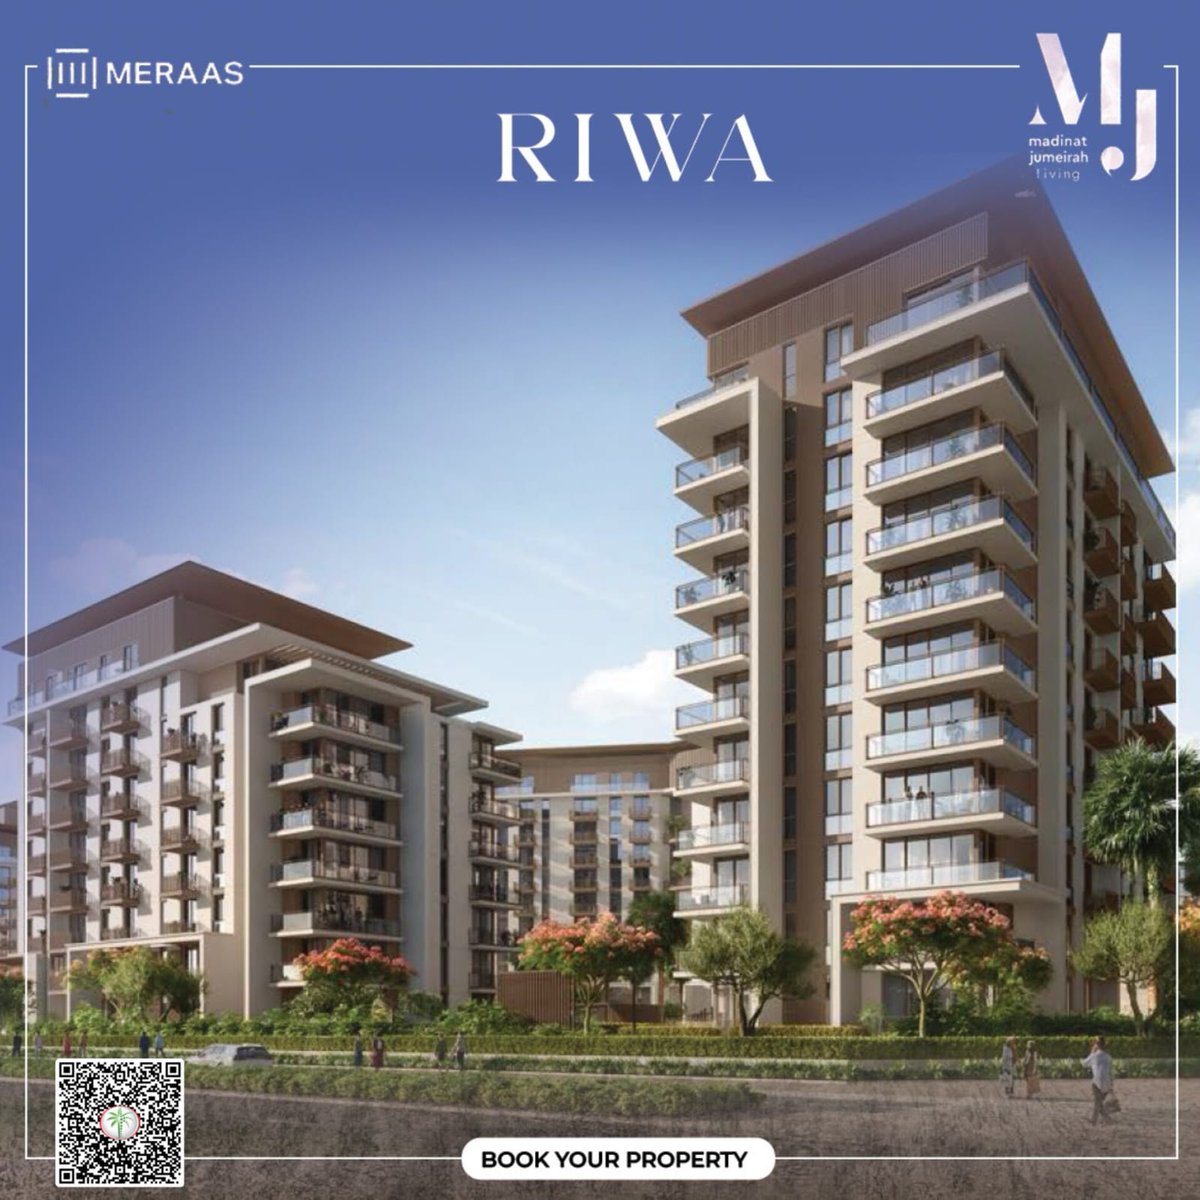 🌆 Live the luxurious life at RIWA by MERAAS, where every moment is a masterpiece! 

Choose from 1-3 BR residences & 4 BR penthouses starting at AED 2.35 M. 

Book your dream property now! 

#LuxuryLiving #MadinatJumeirahLiving #DubaiRealEstate #DreamHome #RIWAbyMERAAS 🏙️✨